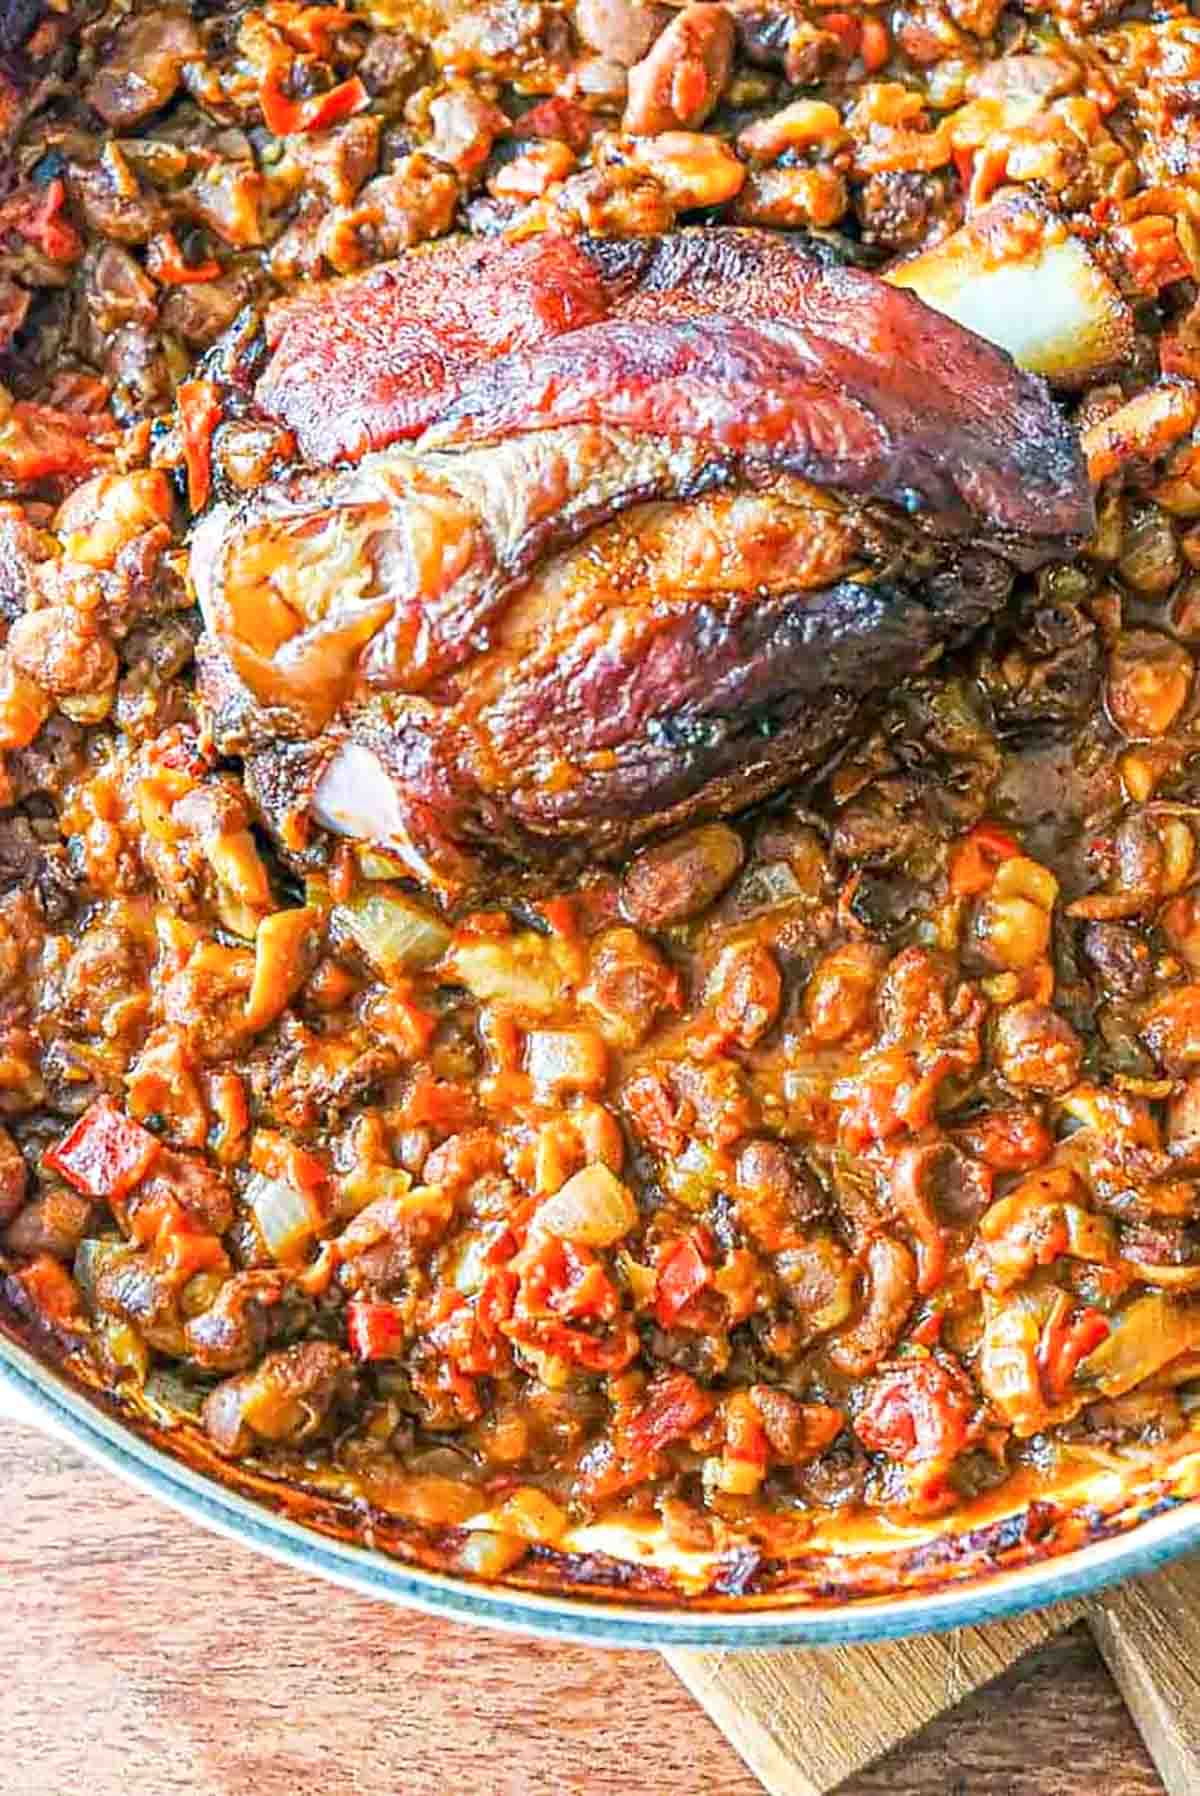 A whole smoked ham hock with crispy roasted skin laying on top of a big pot of baked beans cooked with tomato.